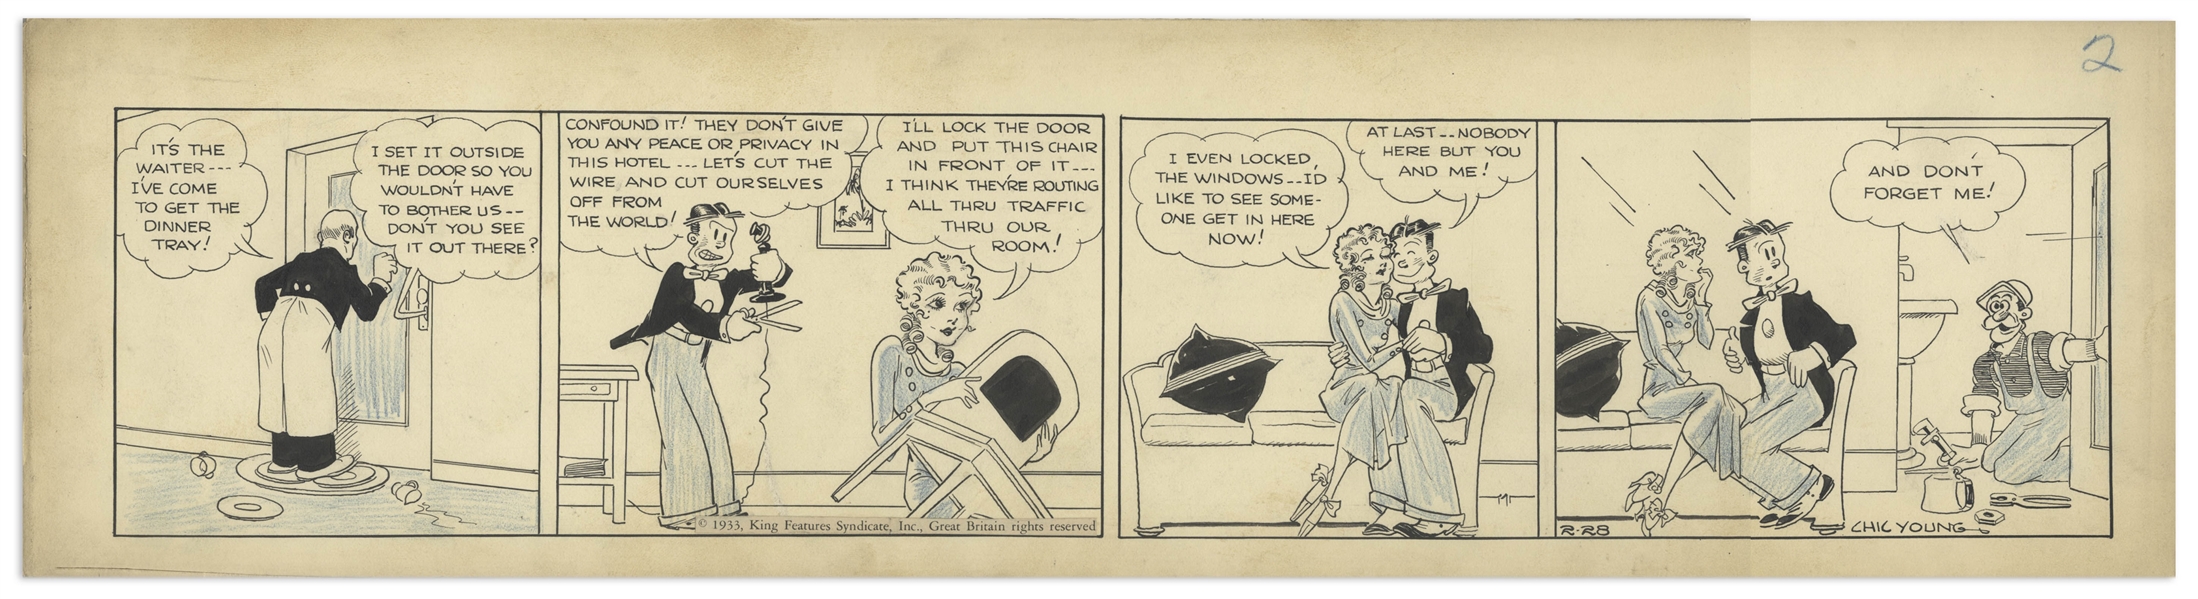 Chic Young Hand-Drawn ''Blondie'' Comic Strip From 1933 Titled ''Alone at Last'' -- Blondie & Dagwood Are Finally On Their Honeymoon